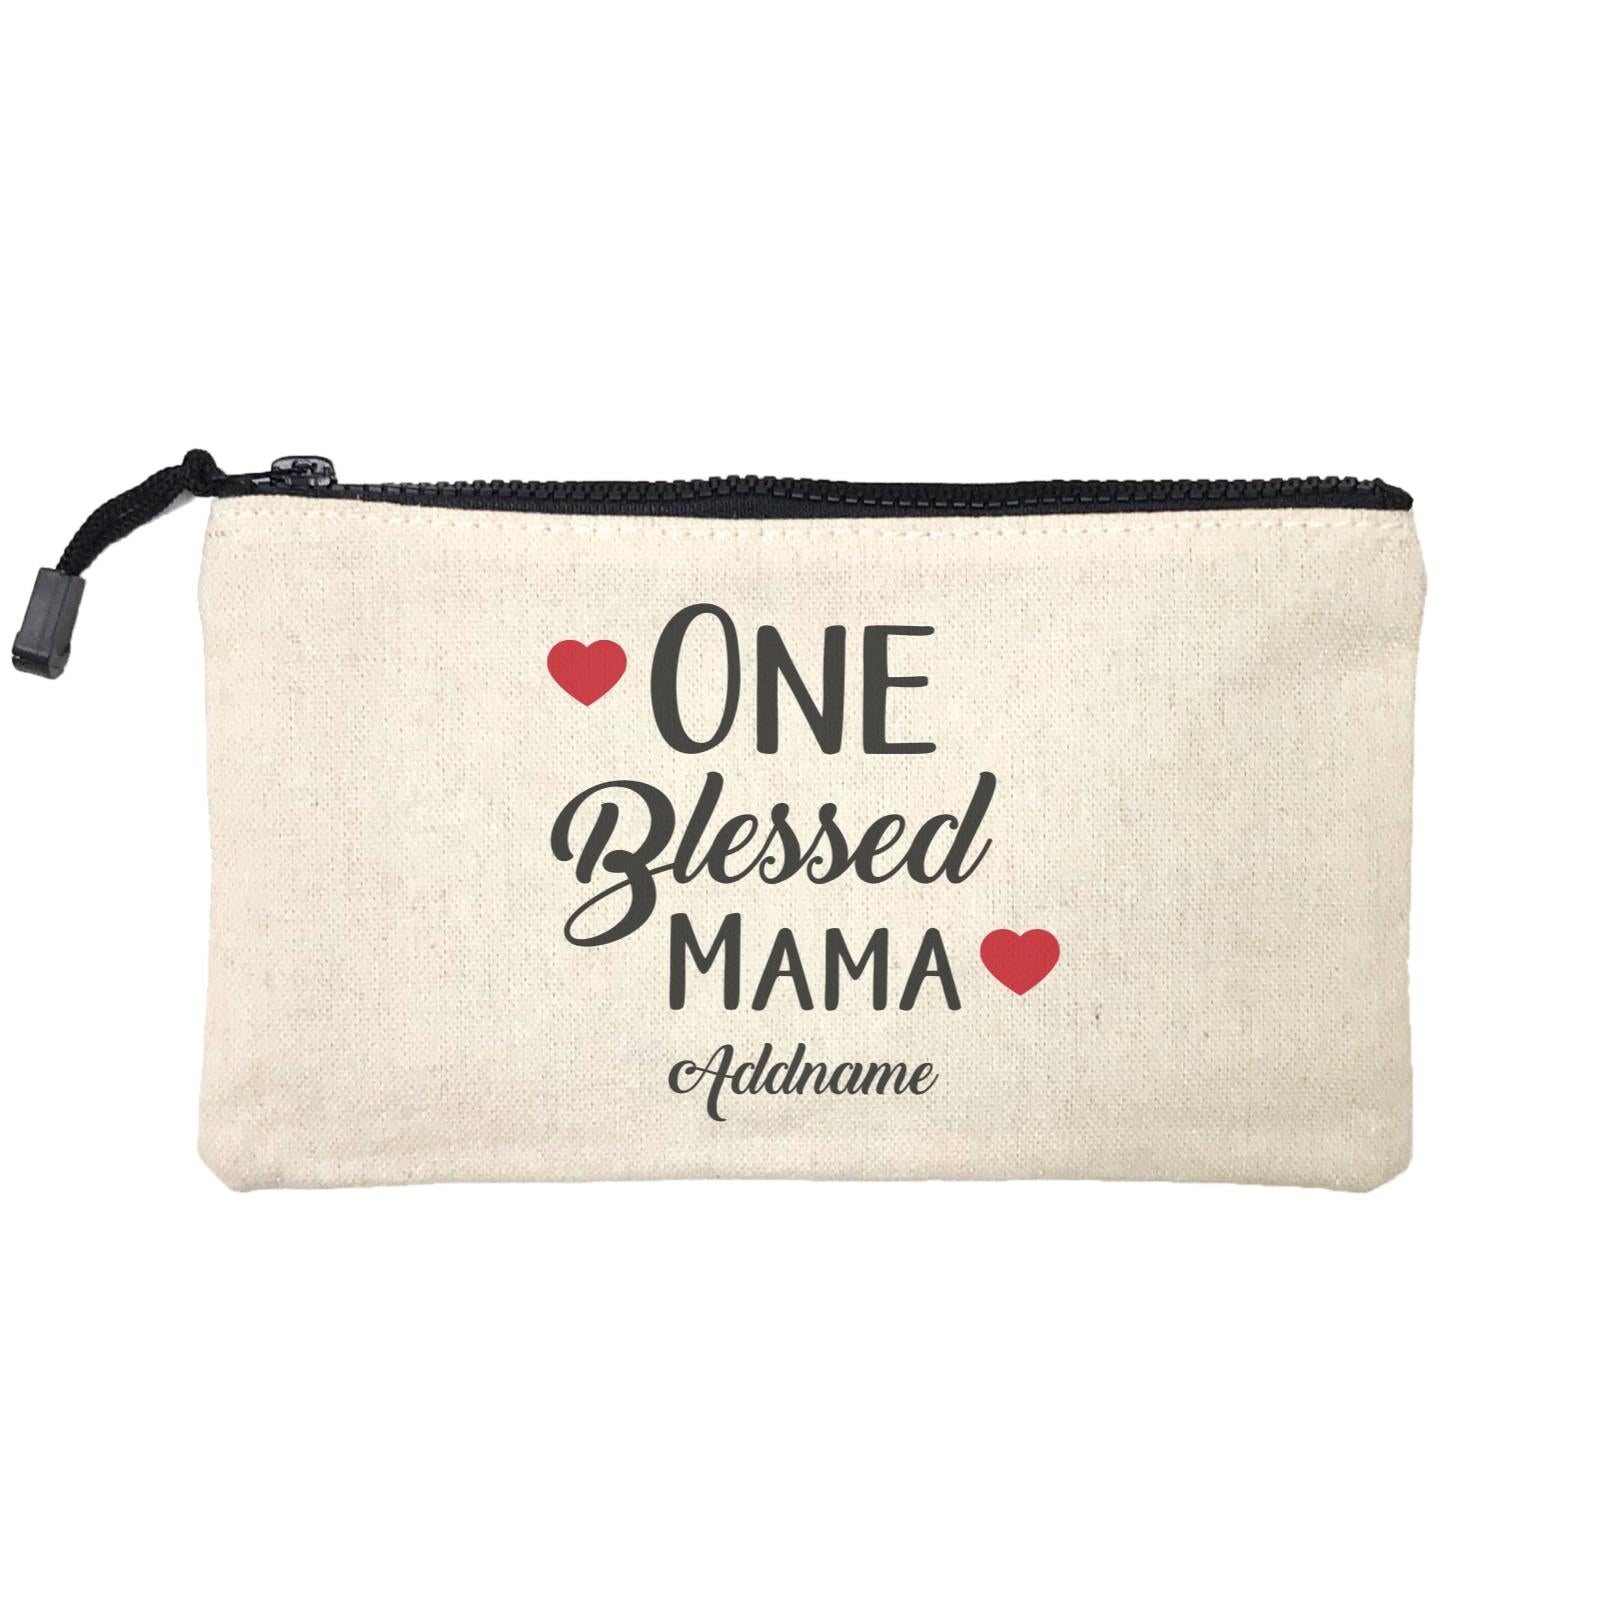 Christian Series One Blessed Mama Addname Mini Accessories Stationery Pouch